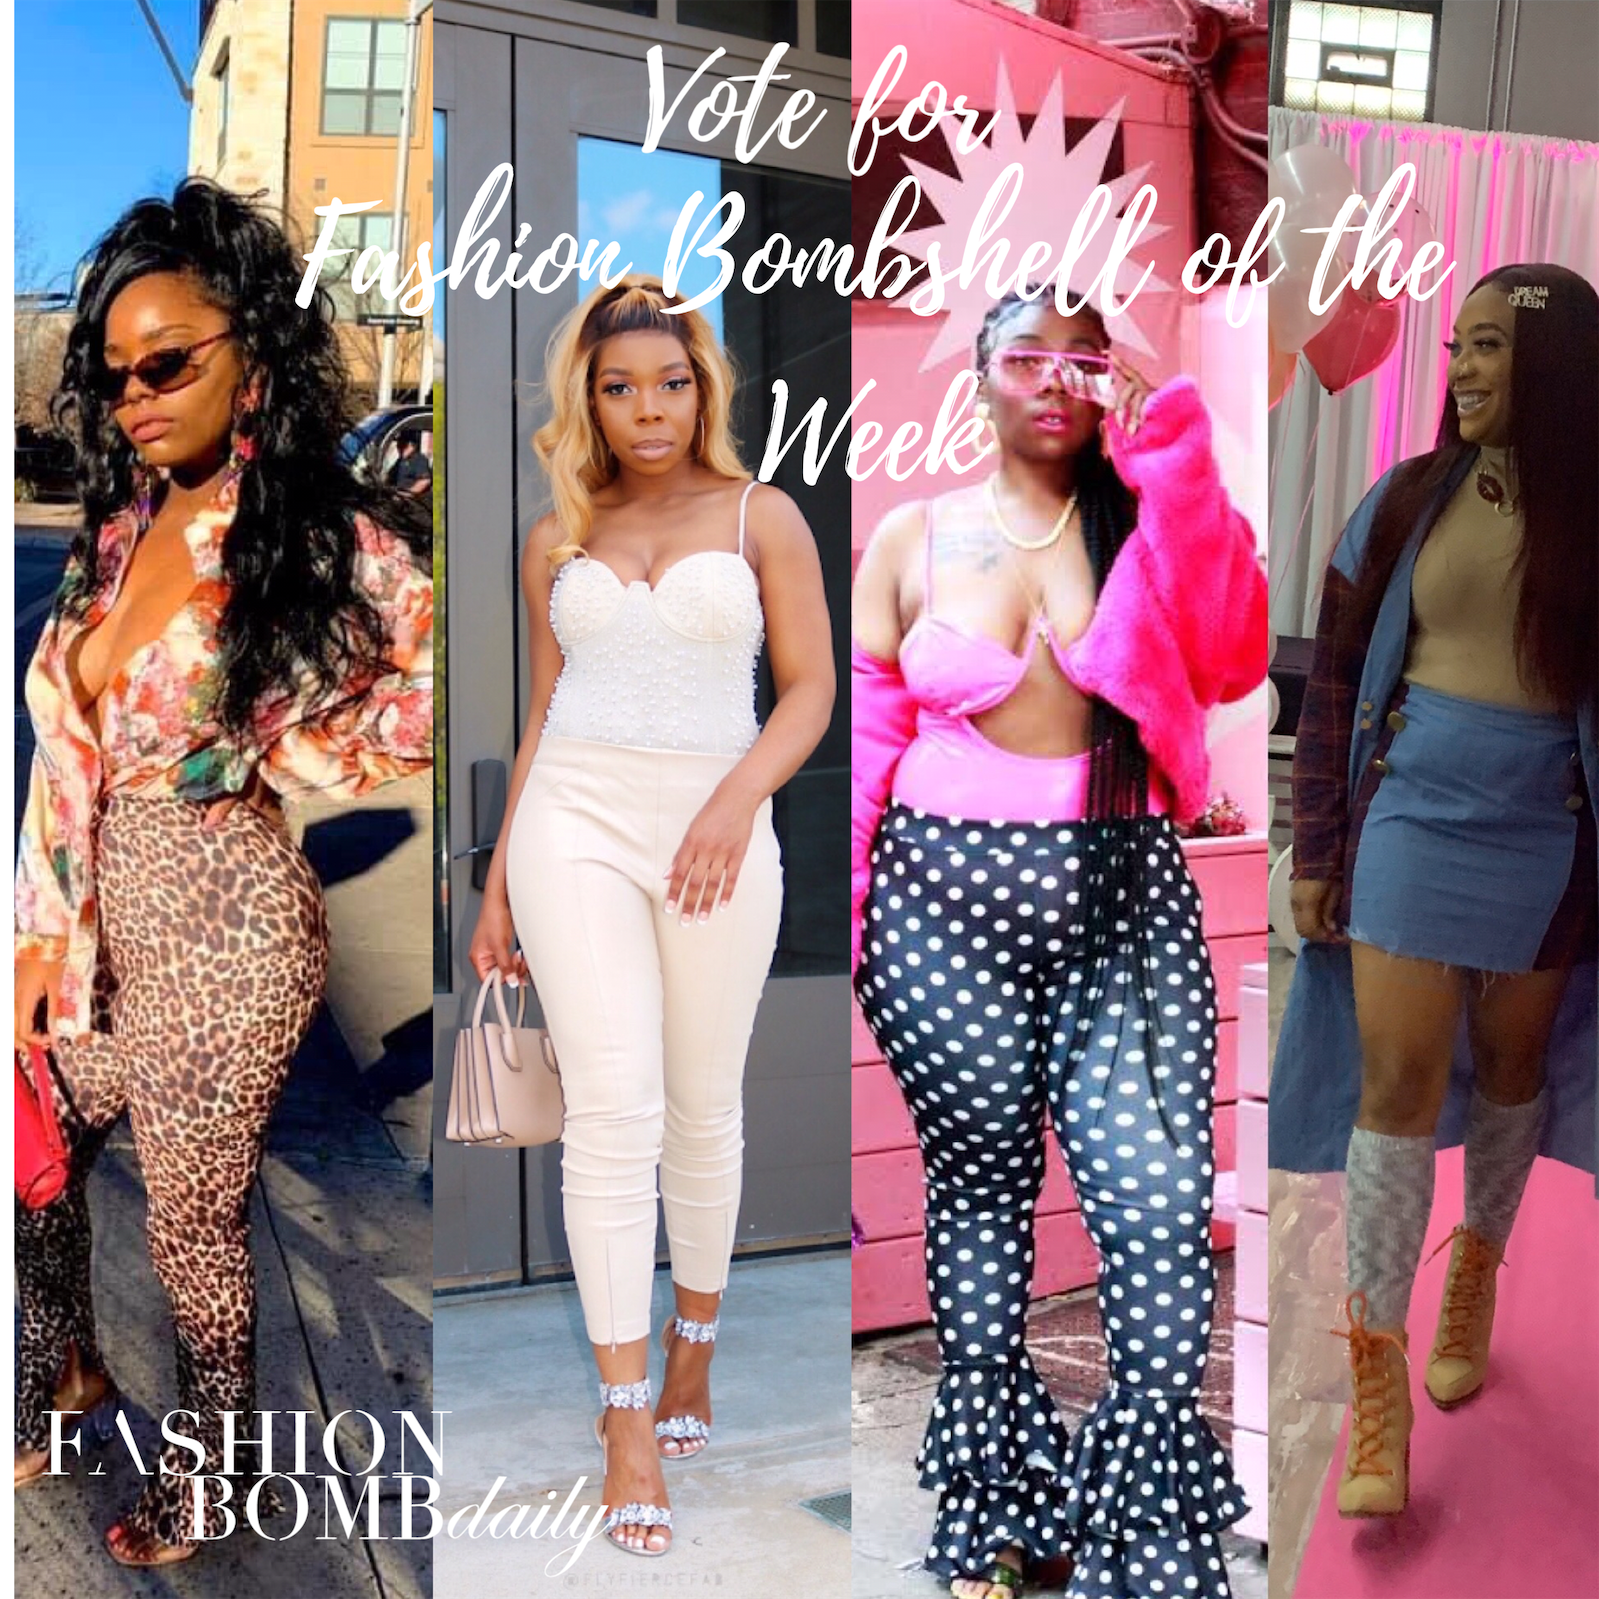 Vote for Fashion Bombshell of the Week: Will it be Sasha from ...